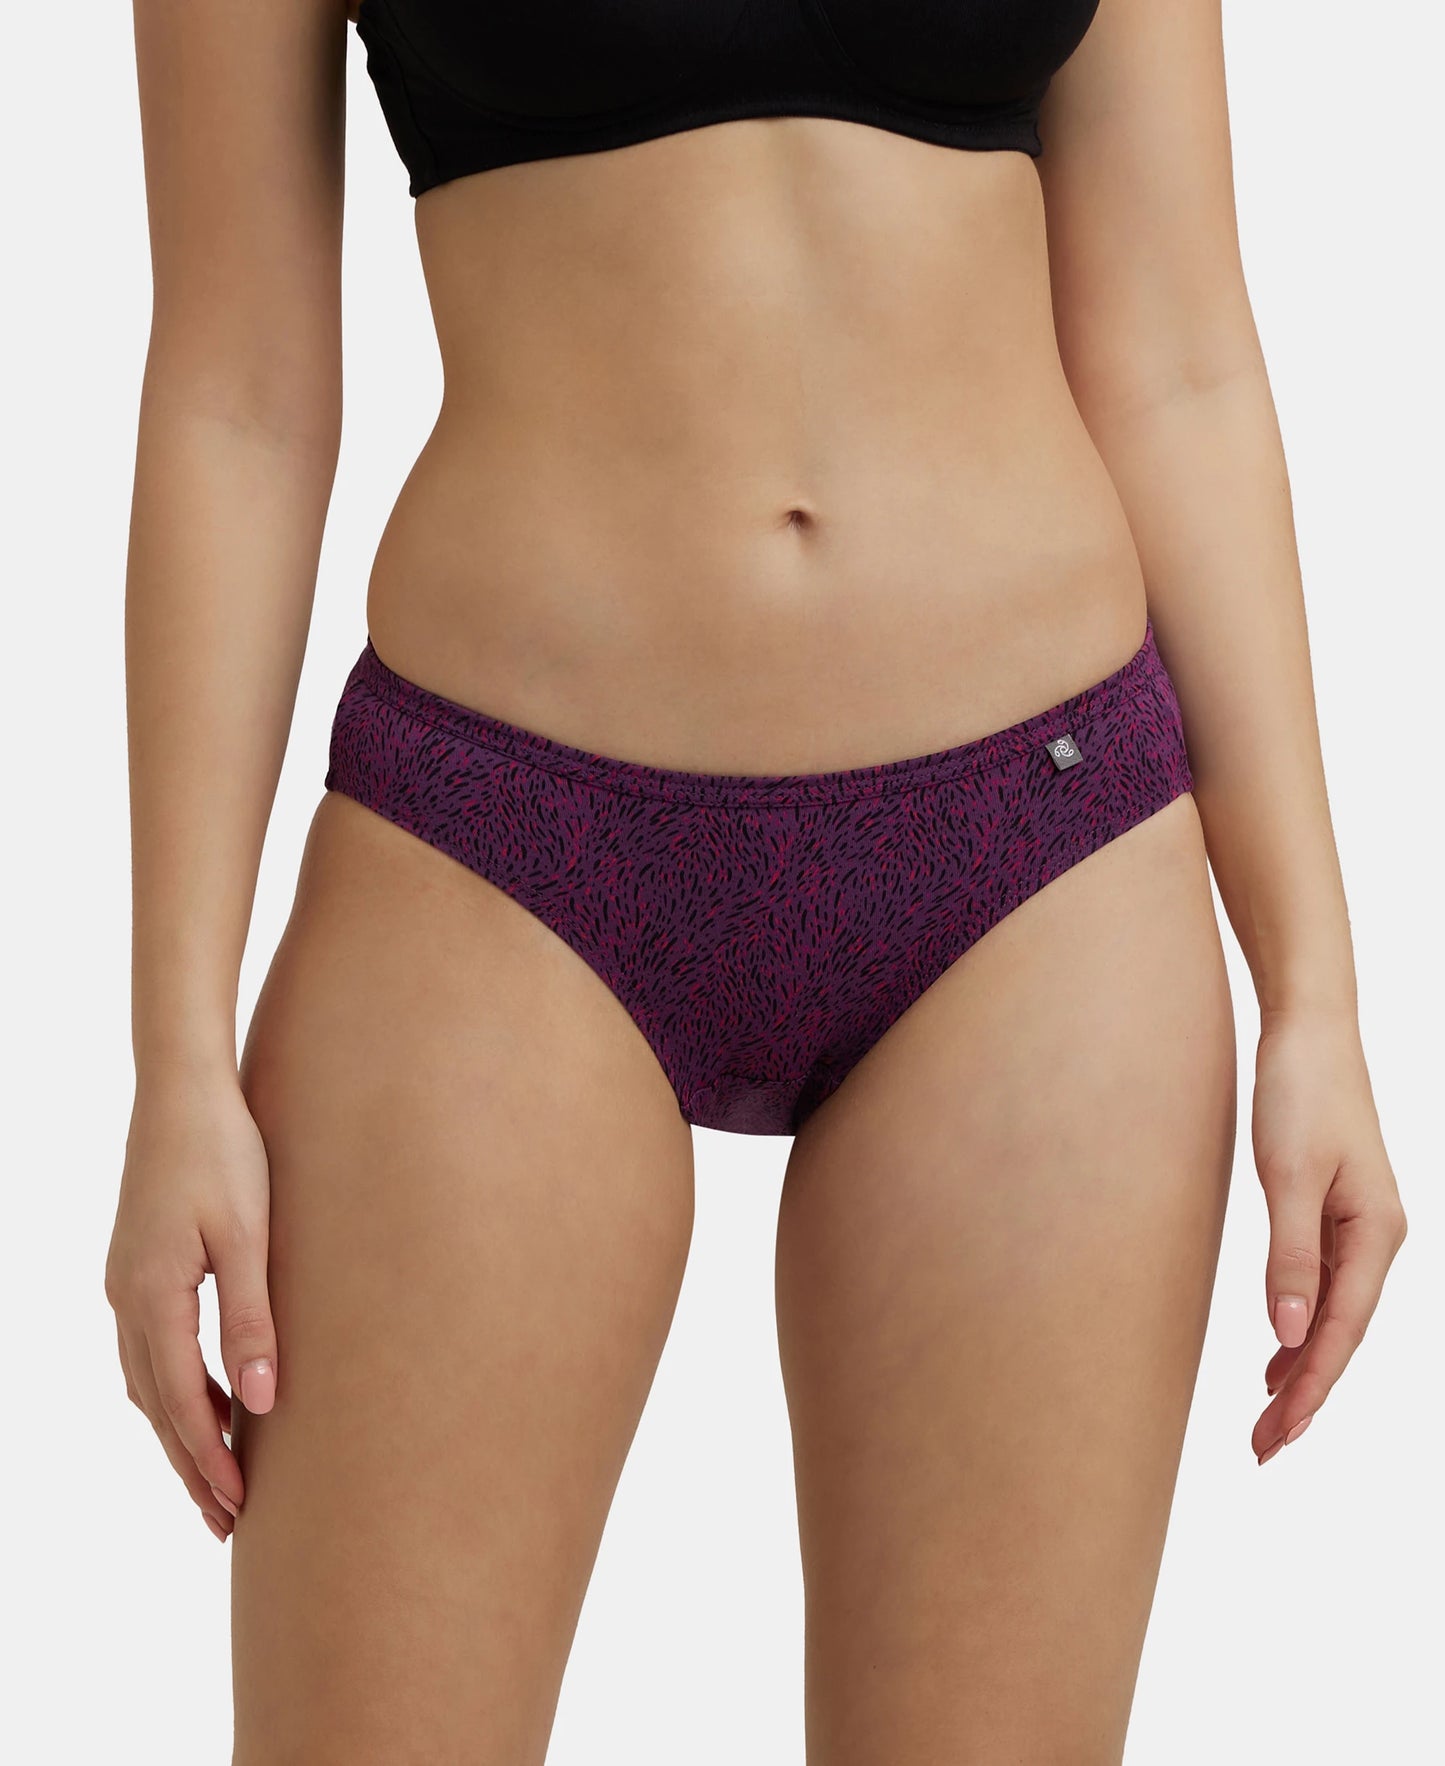 Medium Coverage Super Combed Cotton Bikini With Concealed Waistband and StayFresh Treatment - Dark Prints-3